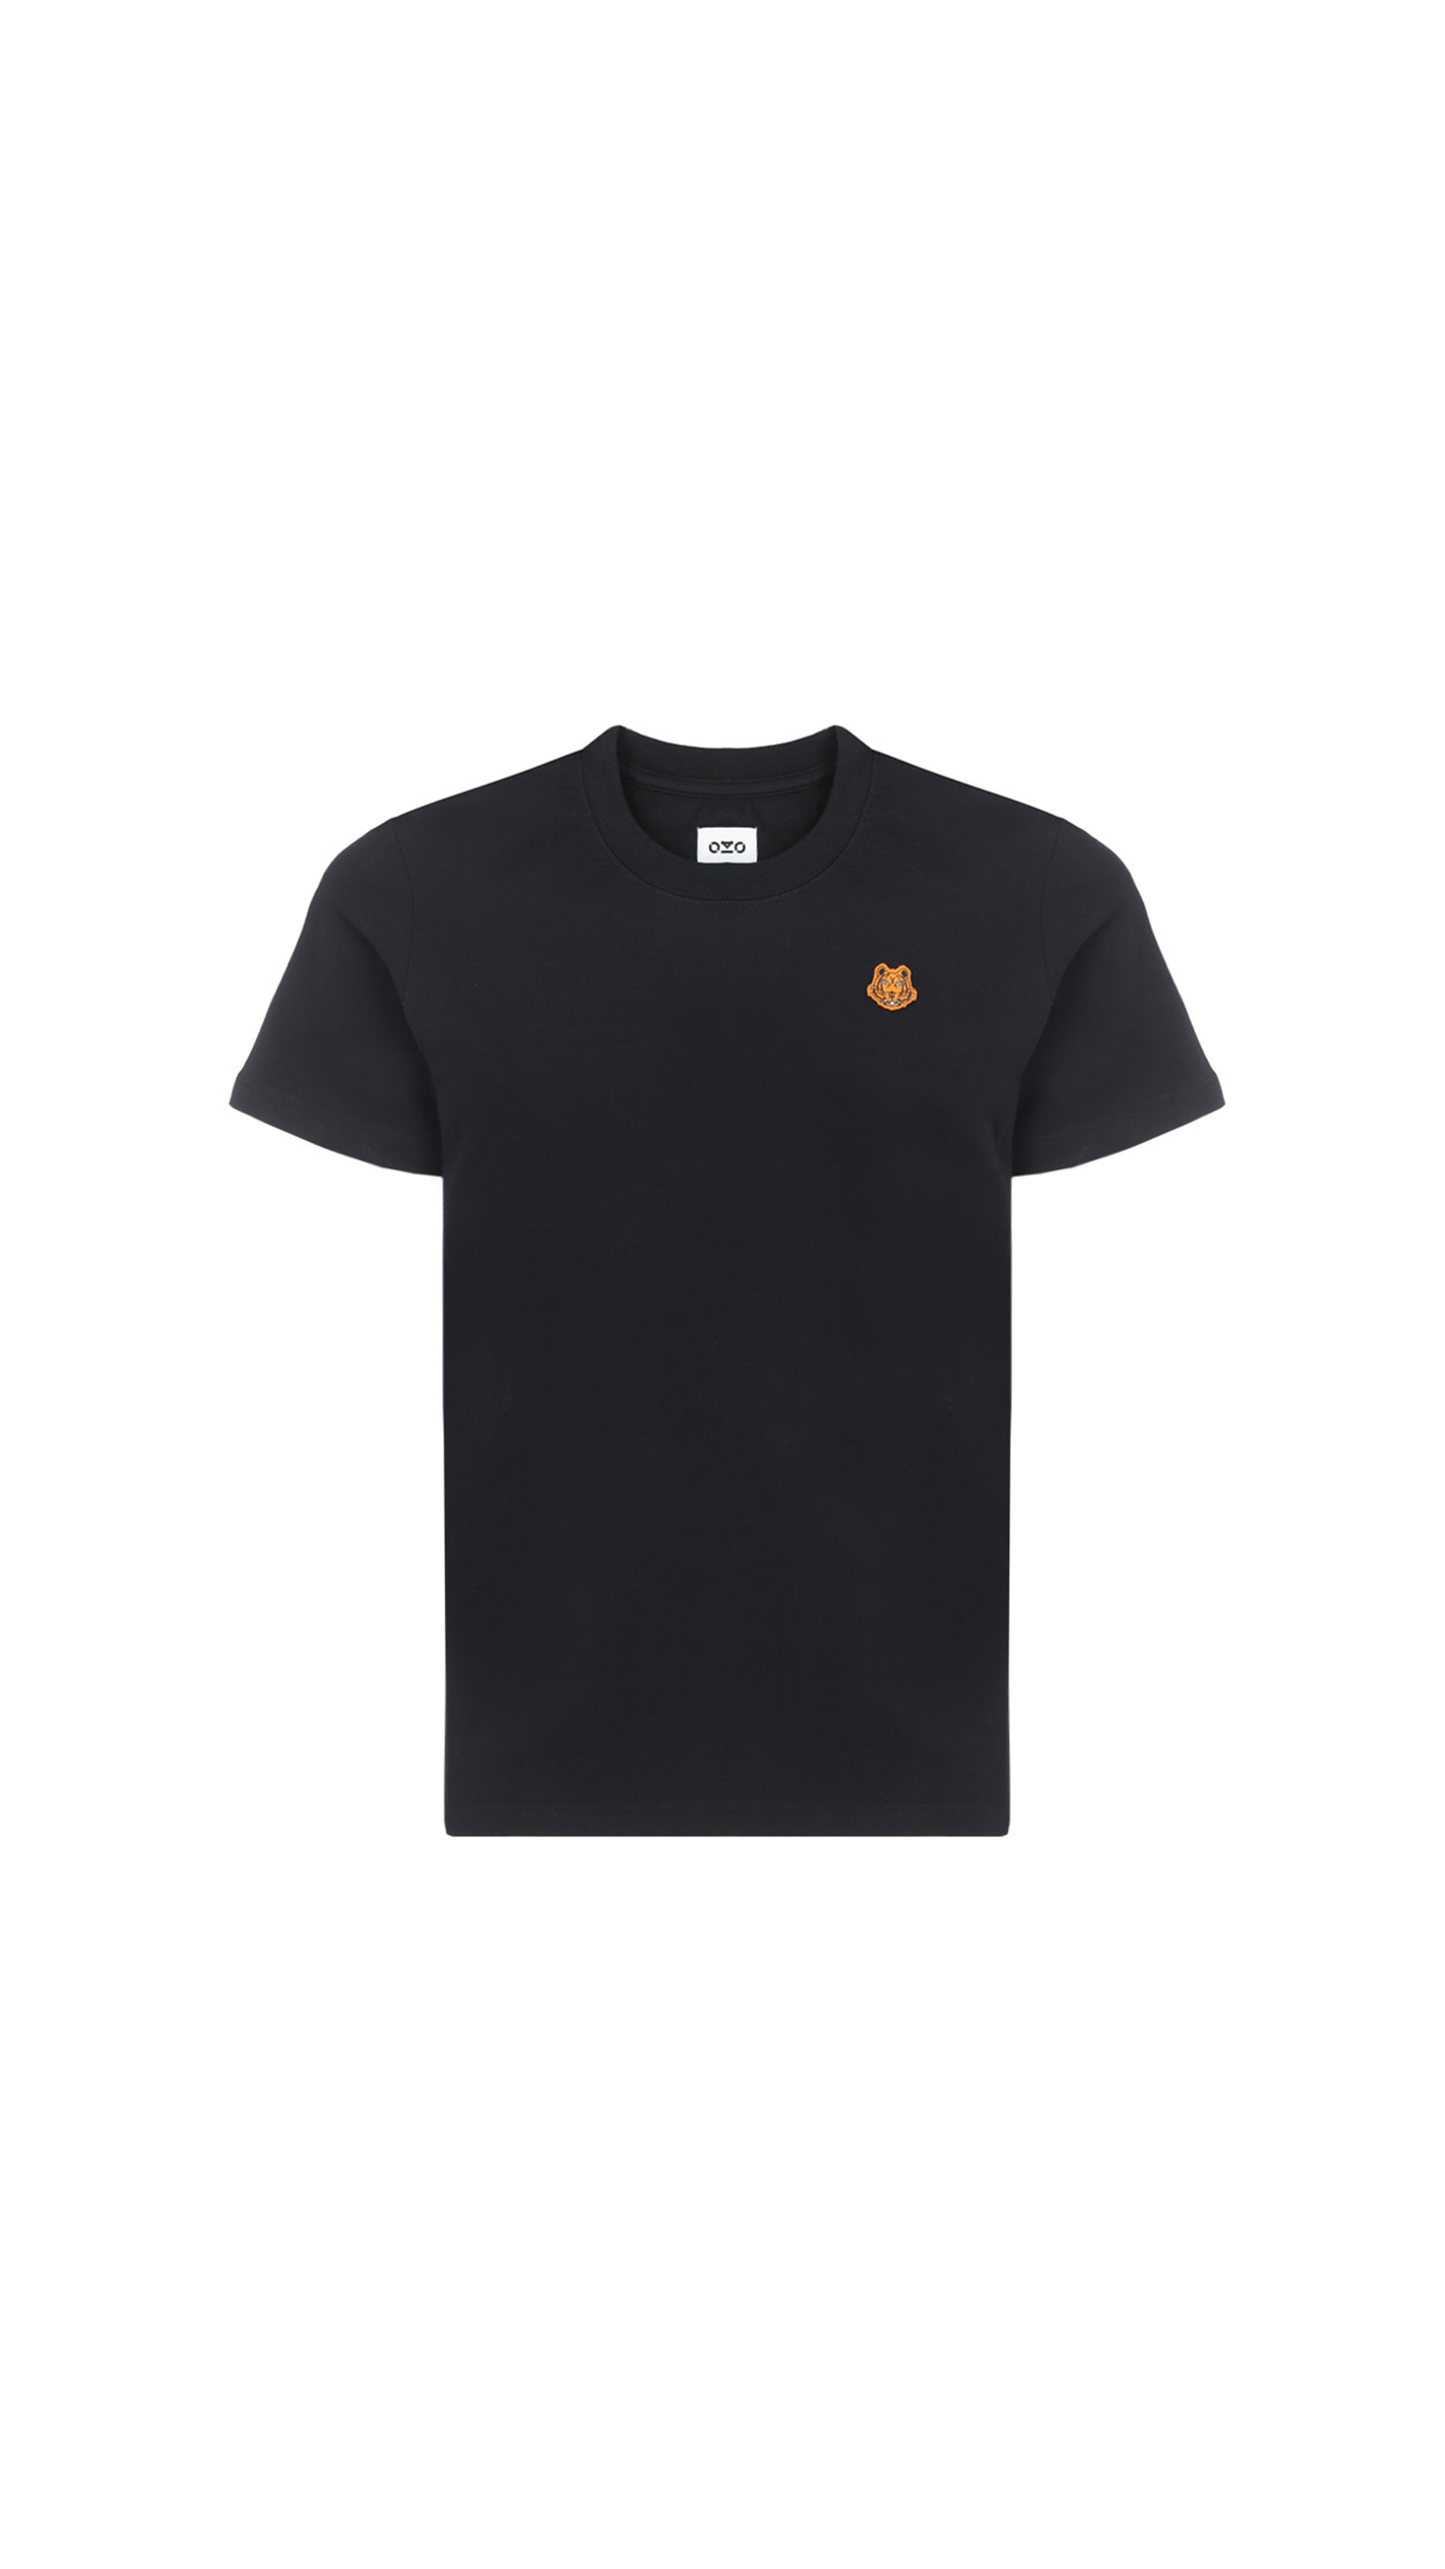 'The Year of the Tiger Capsule Collection' Tiger Crest T-shirt - Black